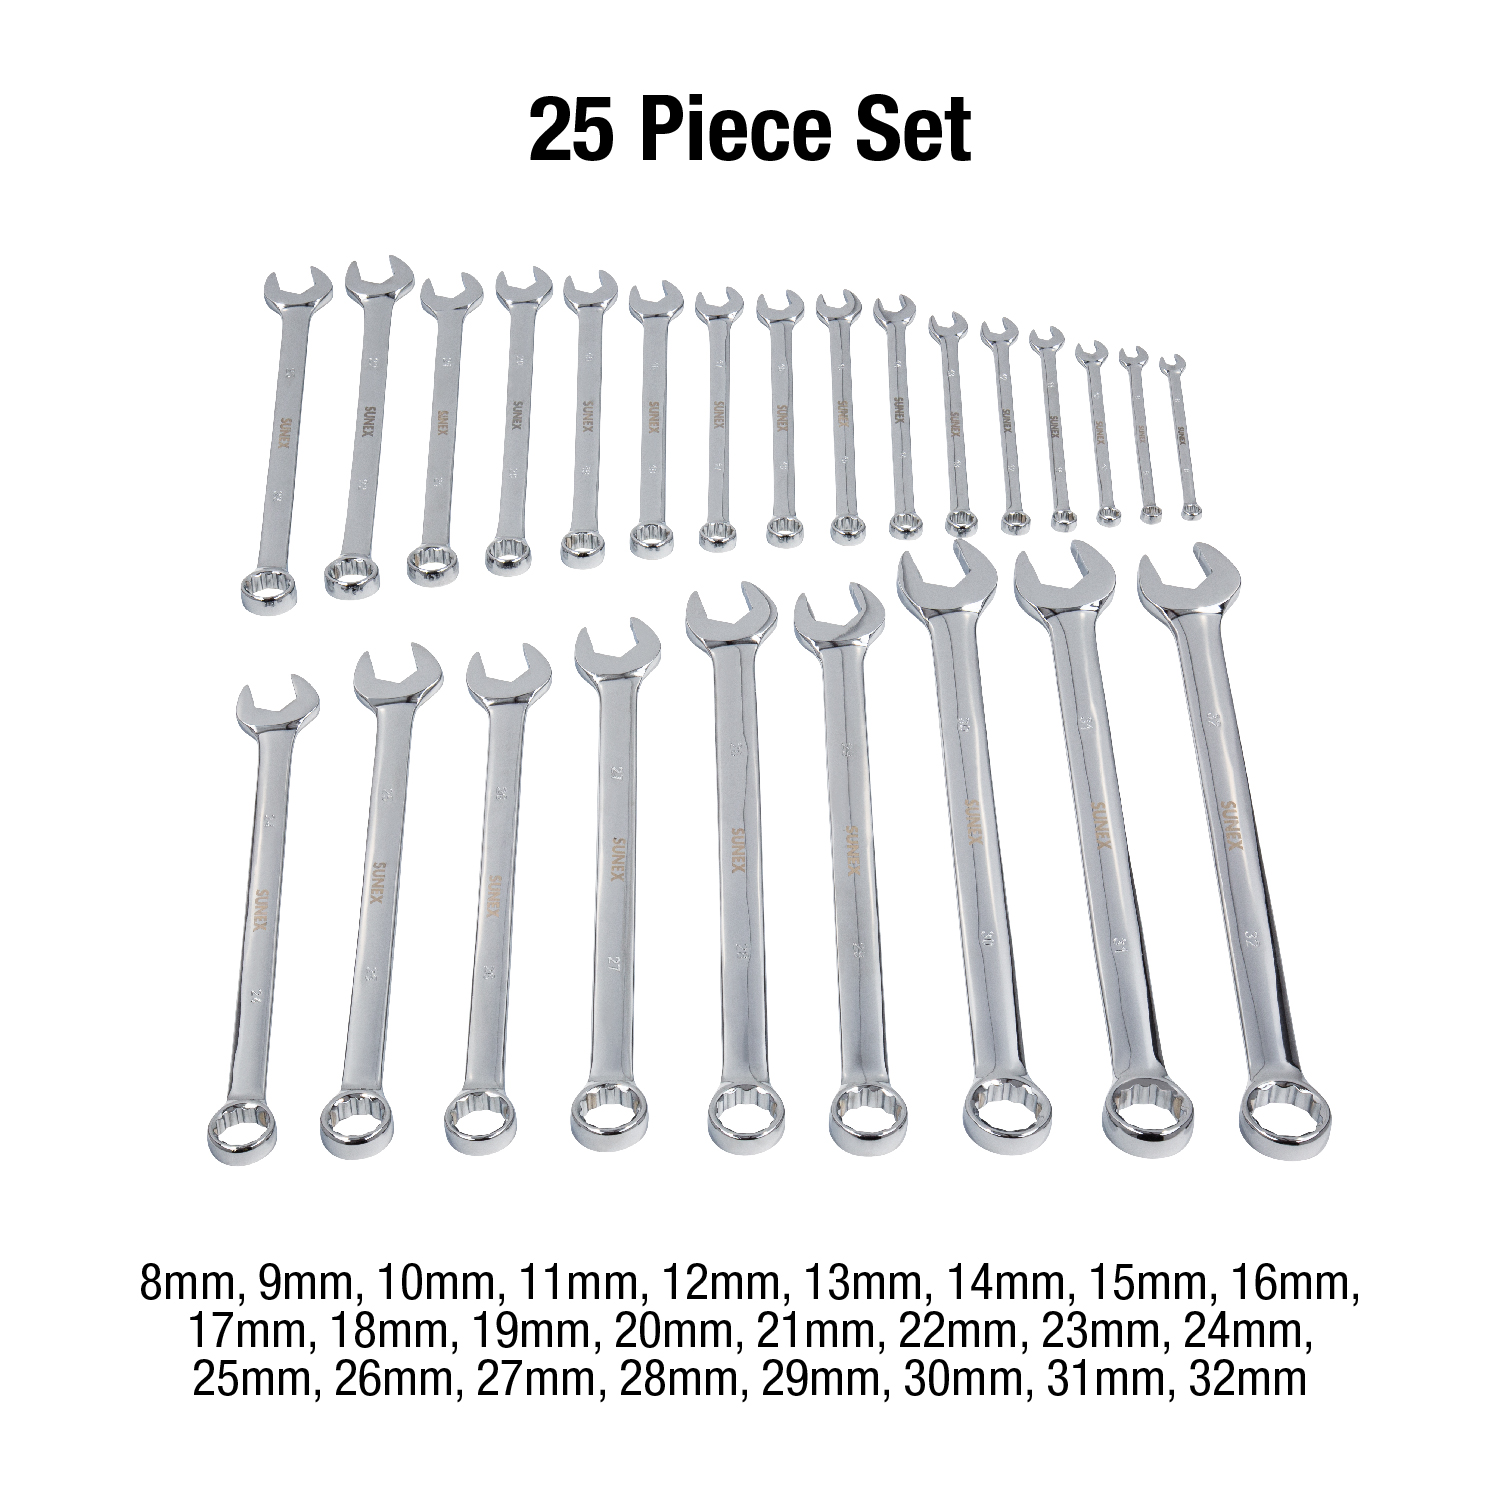 25 Piece Metric Full Polished V-Groove Combination Wrench Set